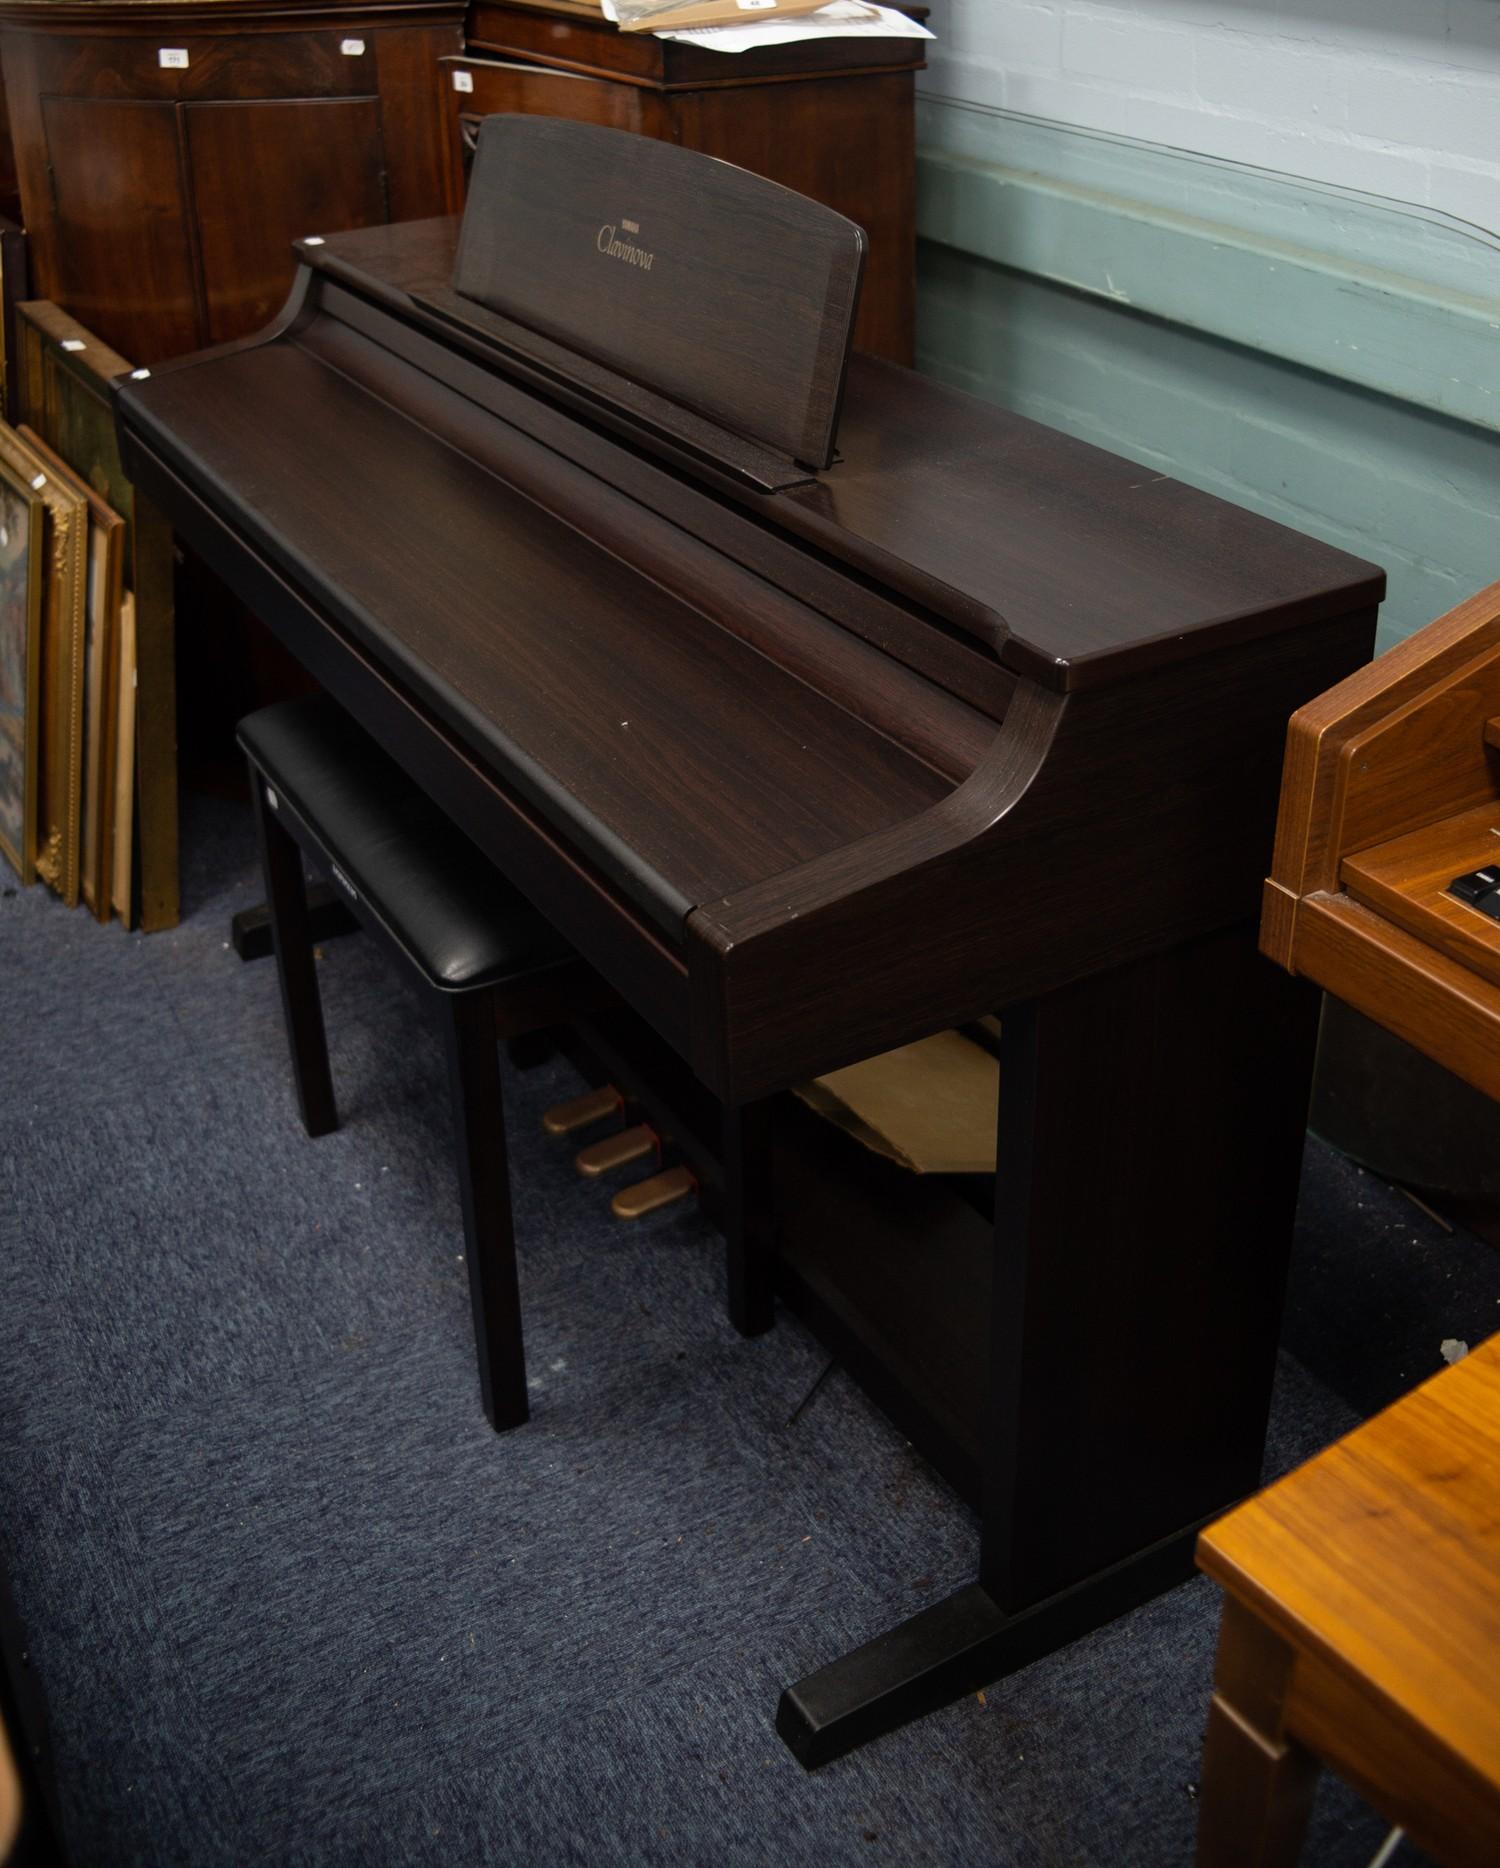 YAMAHA 'CLAVINOVA' SEVEN OCTAVE KEYBOARD, MODEL CLF-155 STEREO WITH METRONOME AND REVERB MULTI-MID - Image 4 of 7